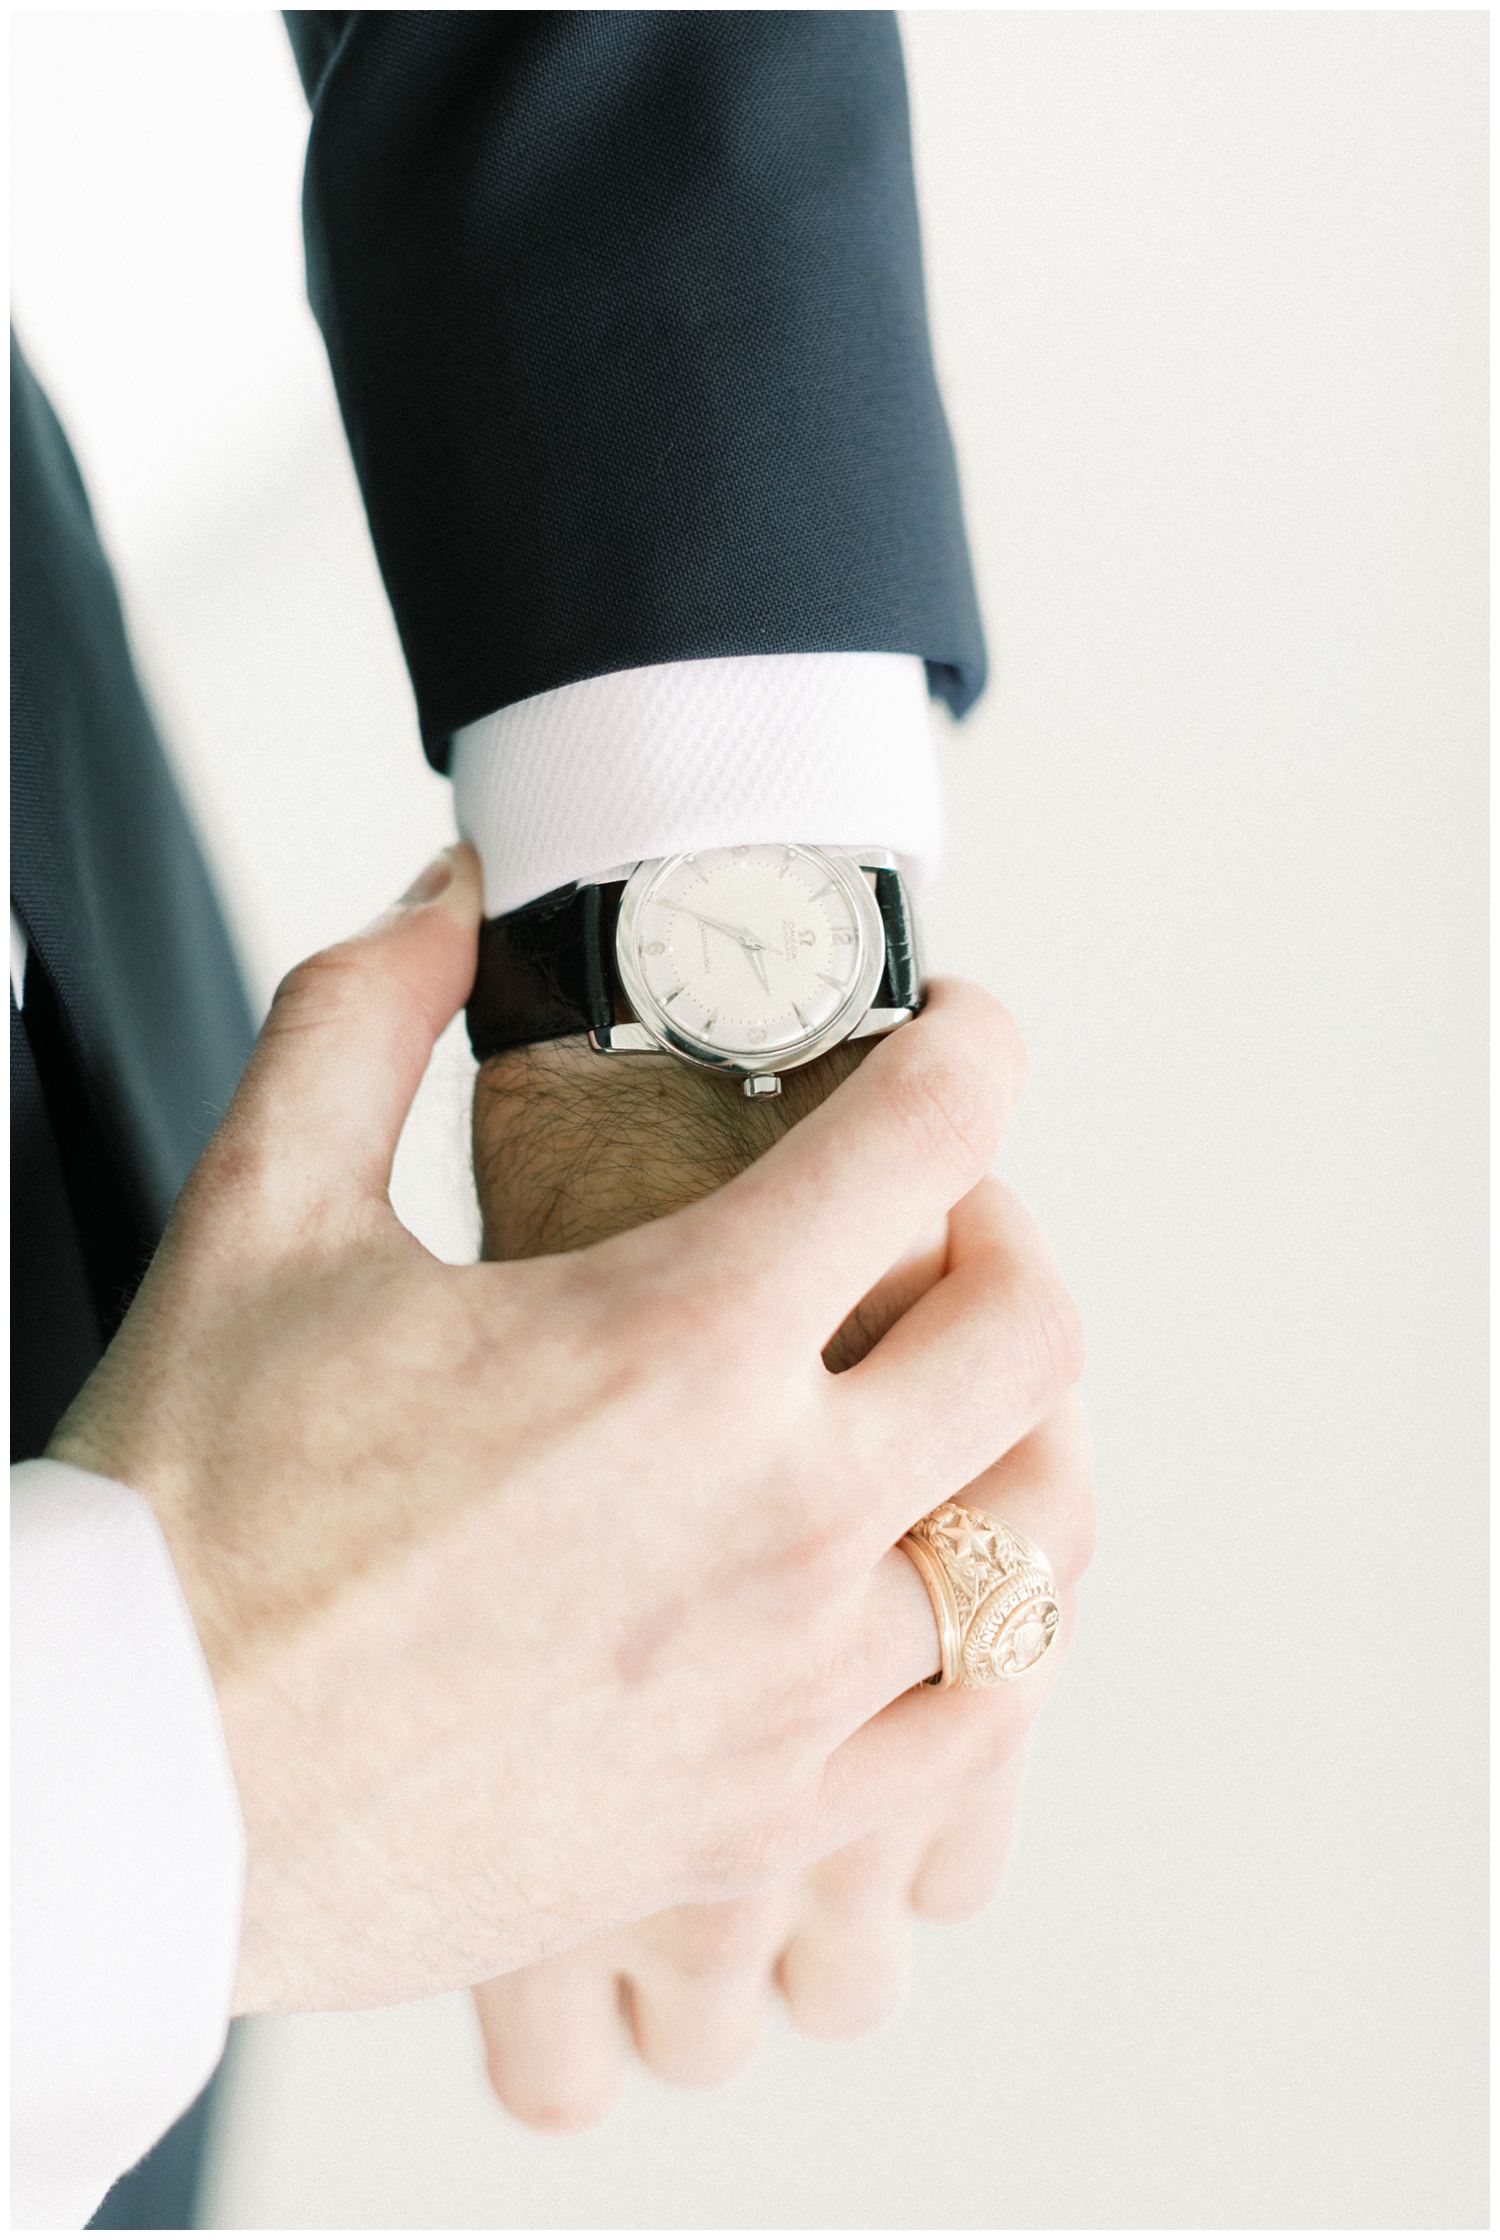 groom holding his watch on wedding day